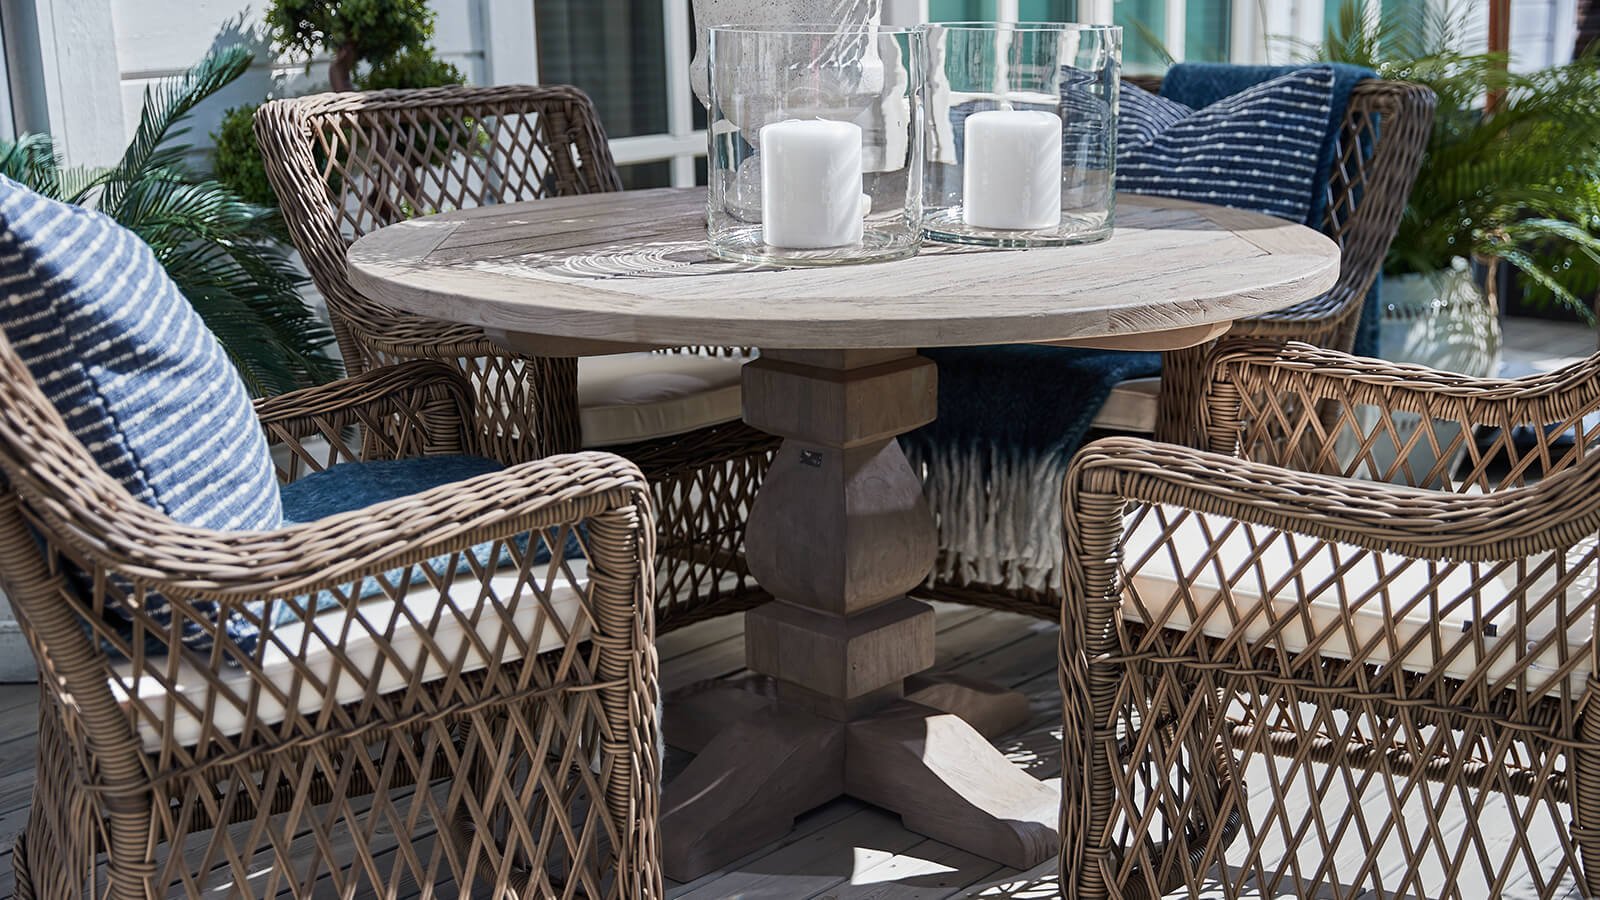 Garden tables | Classic tables for the patio